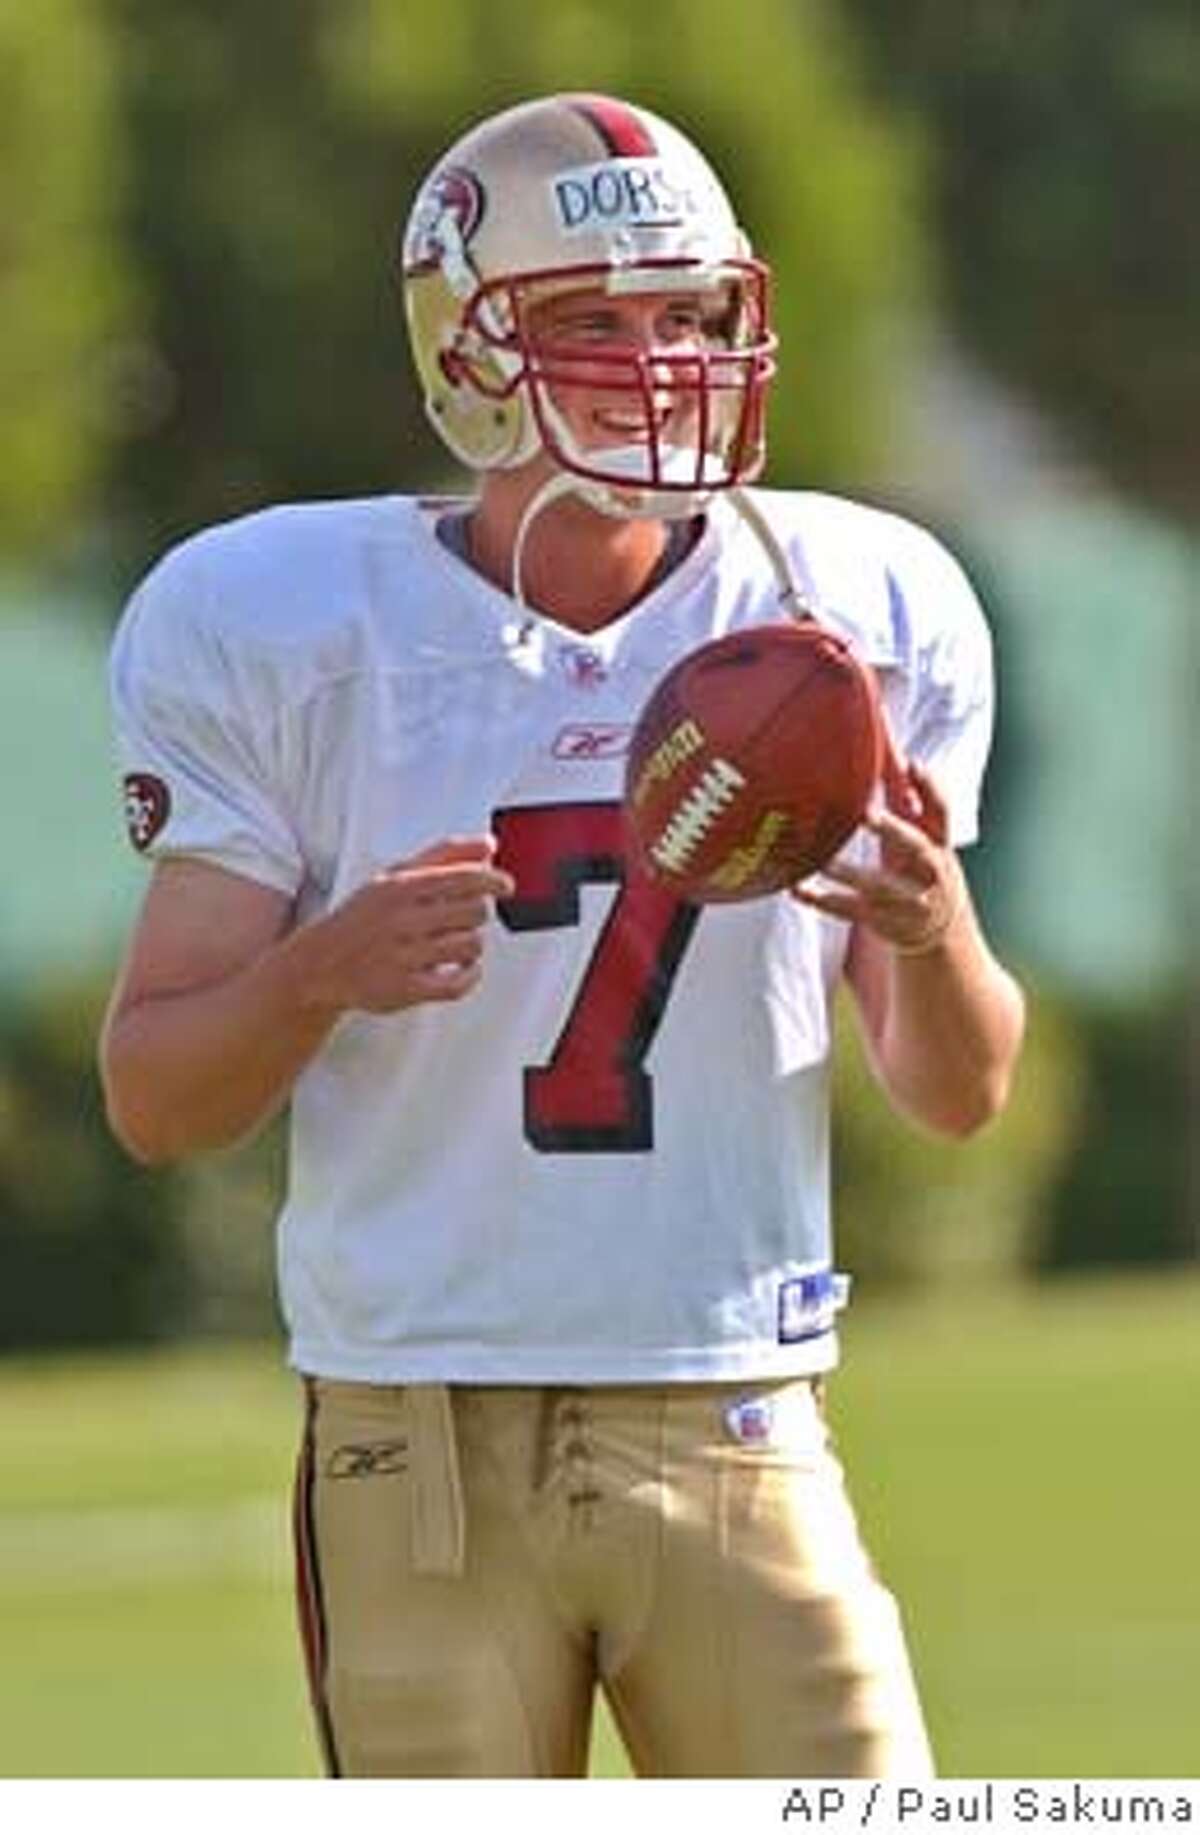 San Francisco 49ers backup quarterback Ken Dorsey plays with the football during practice at the 49ers training camp in Santa Clara, Calif., Tuesday, July 29, 2003. Dorsey was a seventh-round draft selection this year. (AP Photo/Paul Sakuma) cat